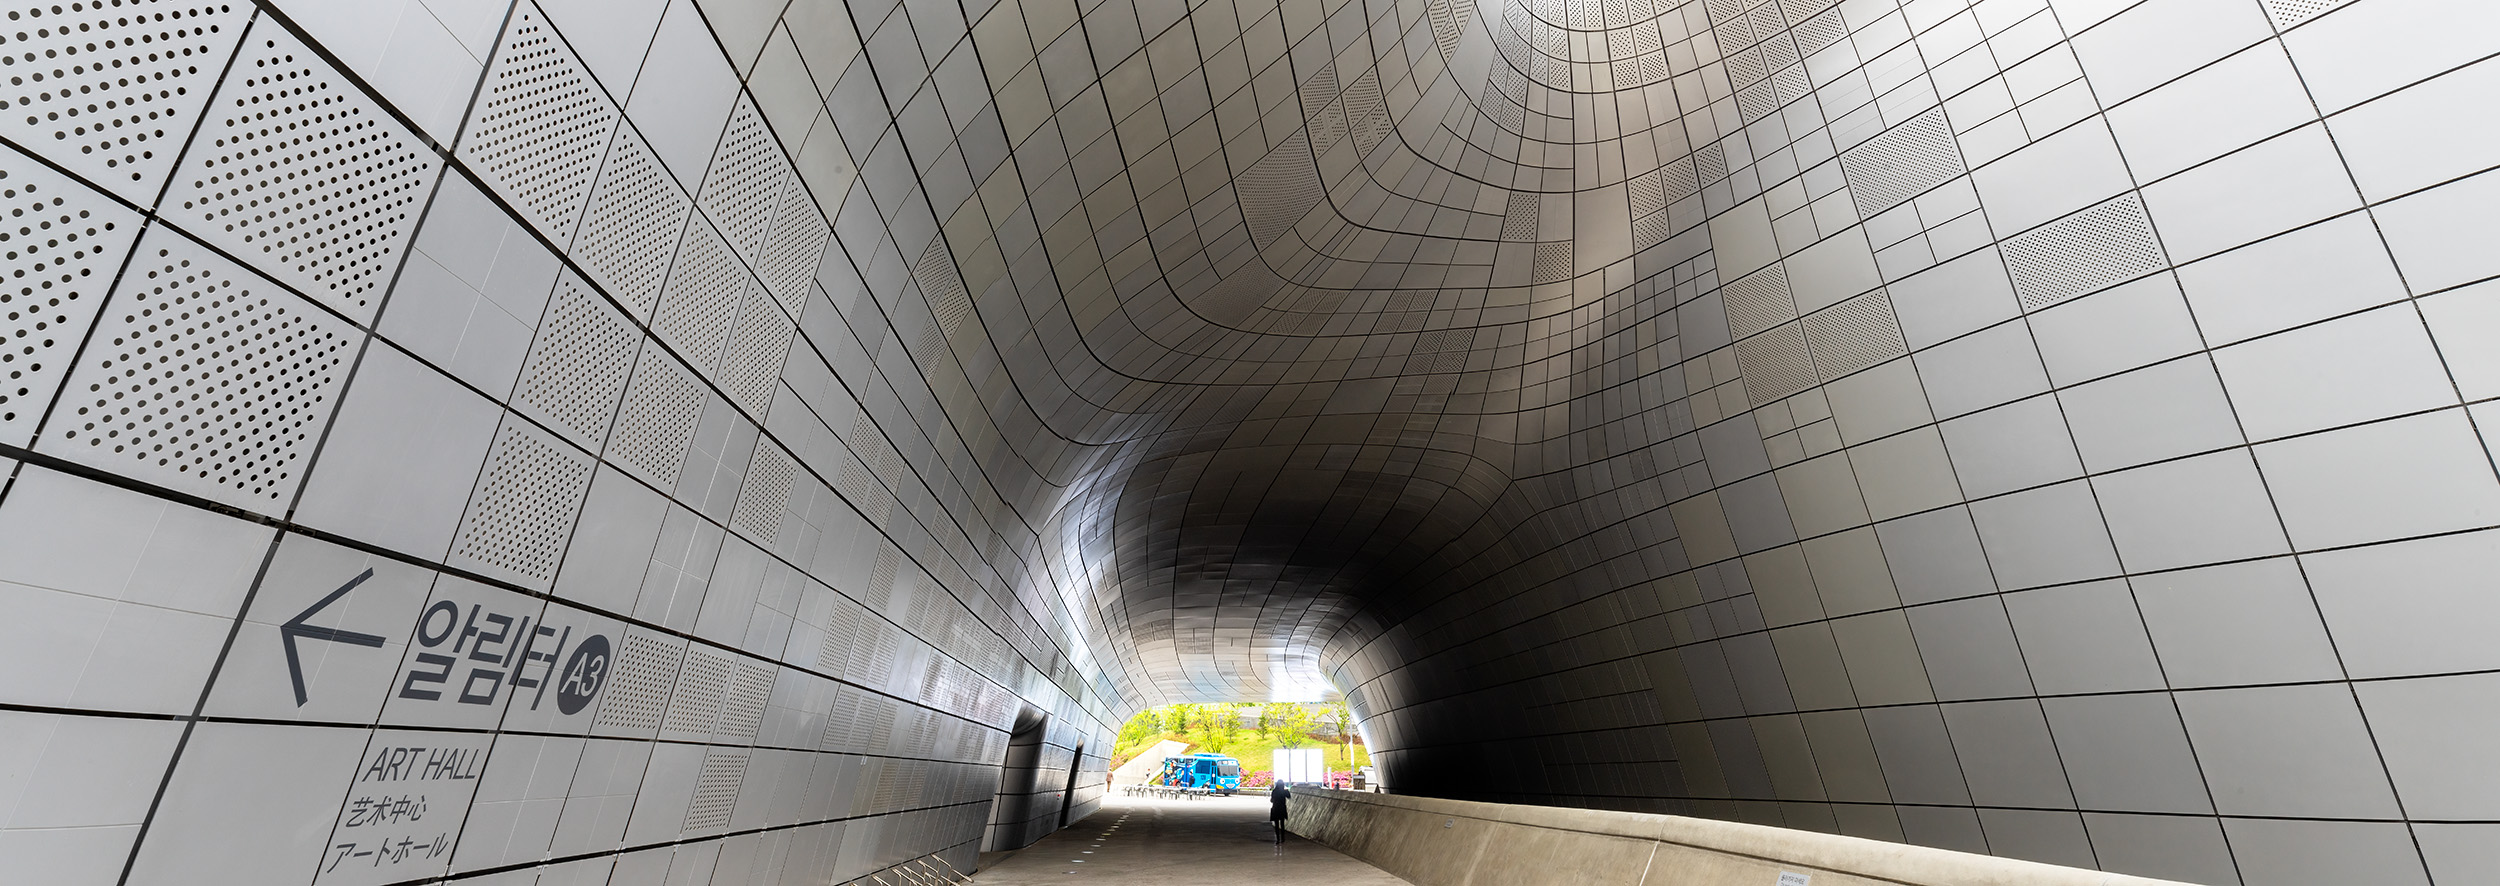 In this panoramic image, the Dongdaemun Design Plaza in Korea takes center stage, revealing its intricate network of curves....